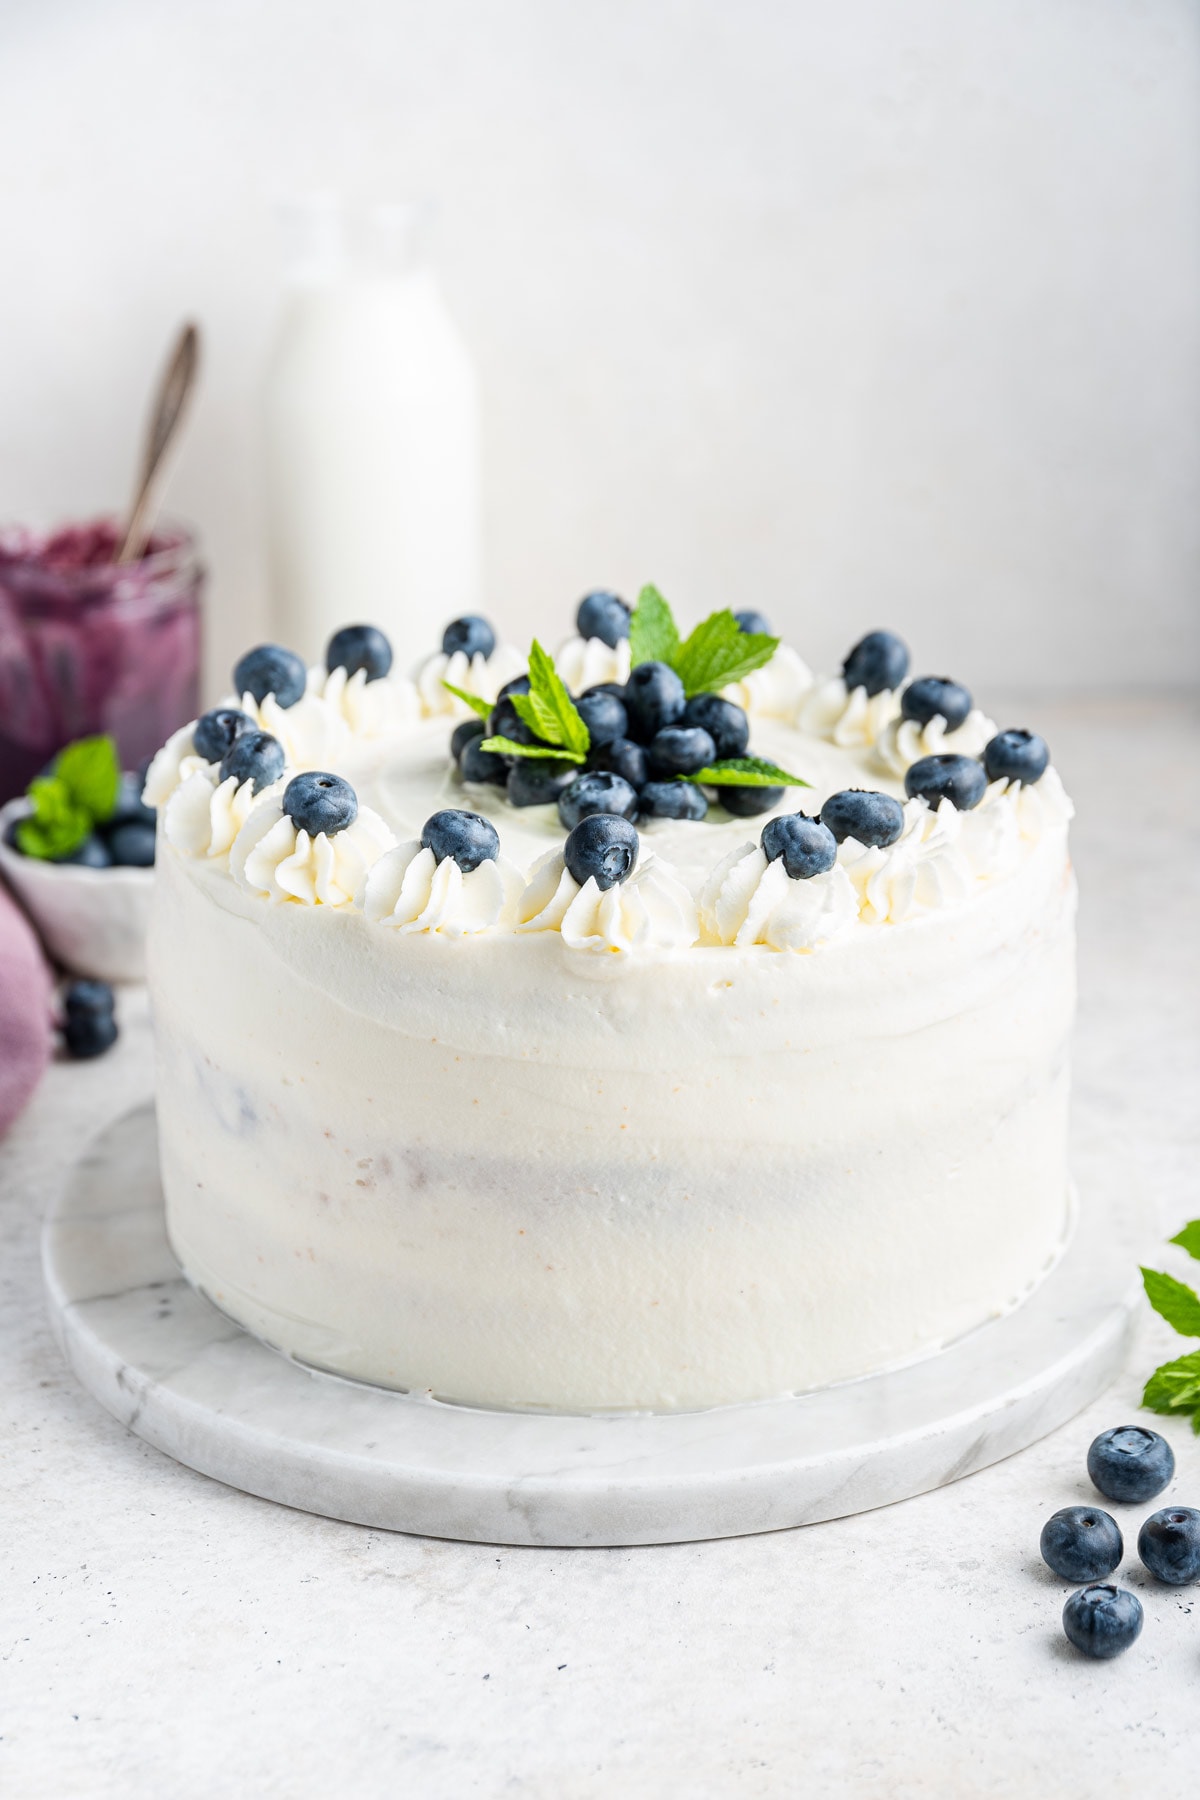 three layer blueberry cake covered with whipped cream frosting and decorated with blueberries